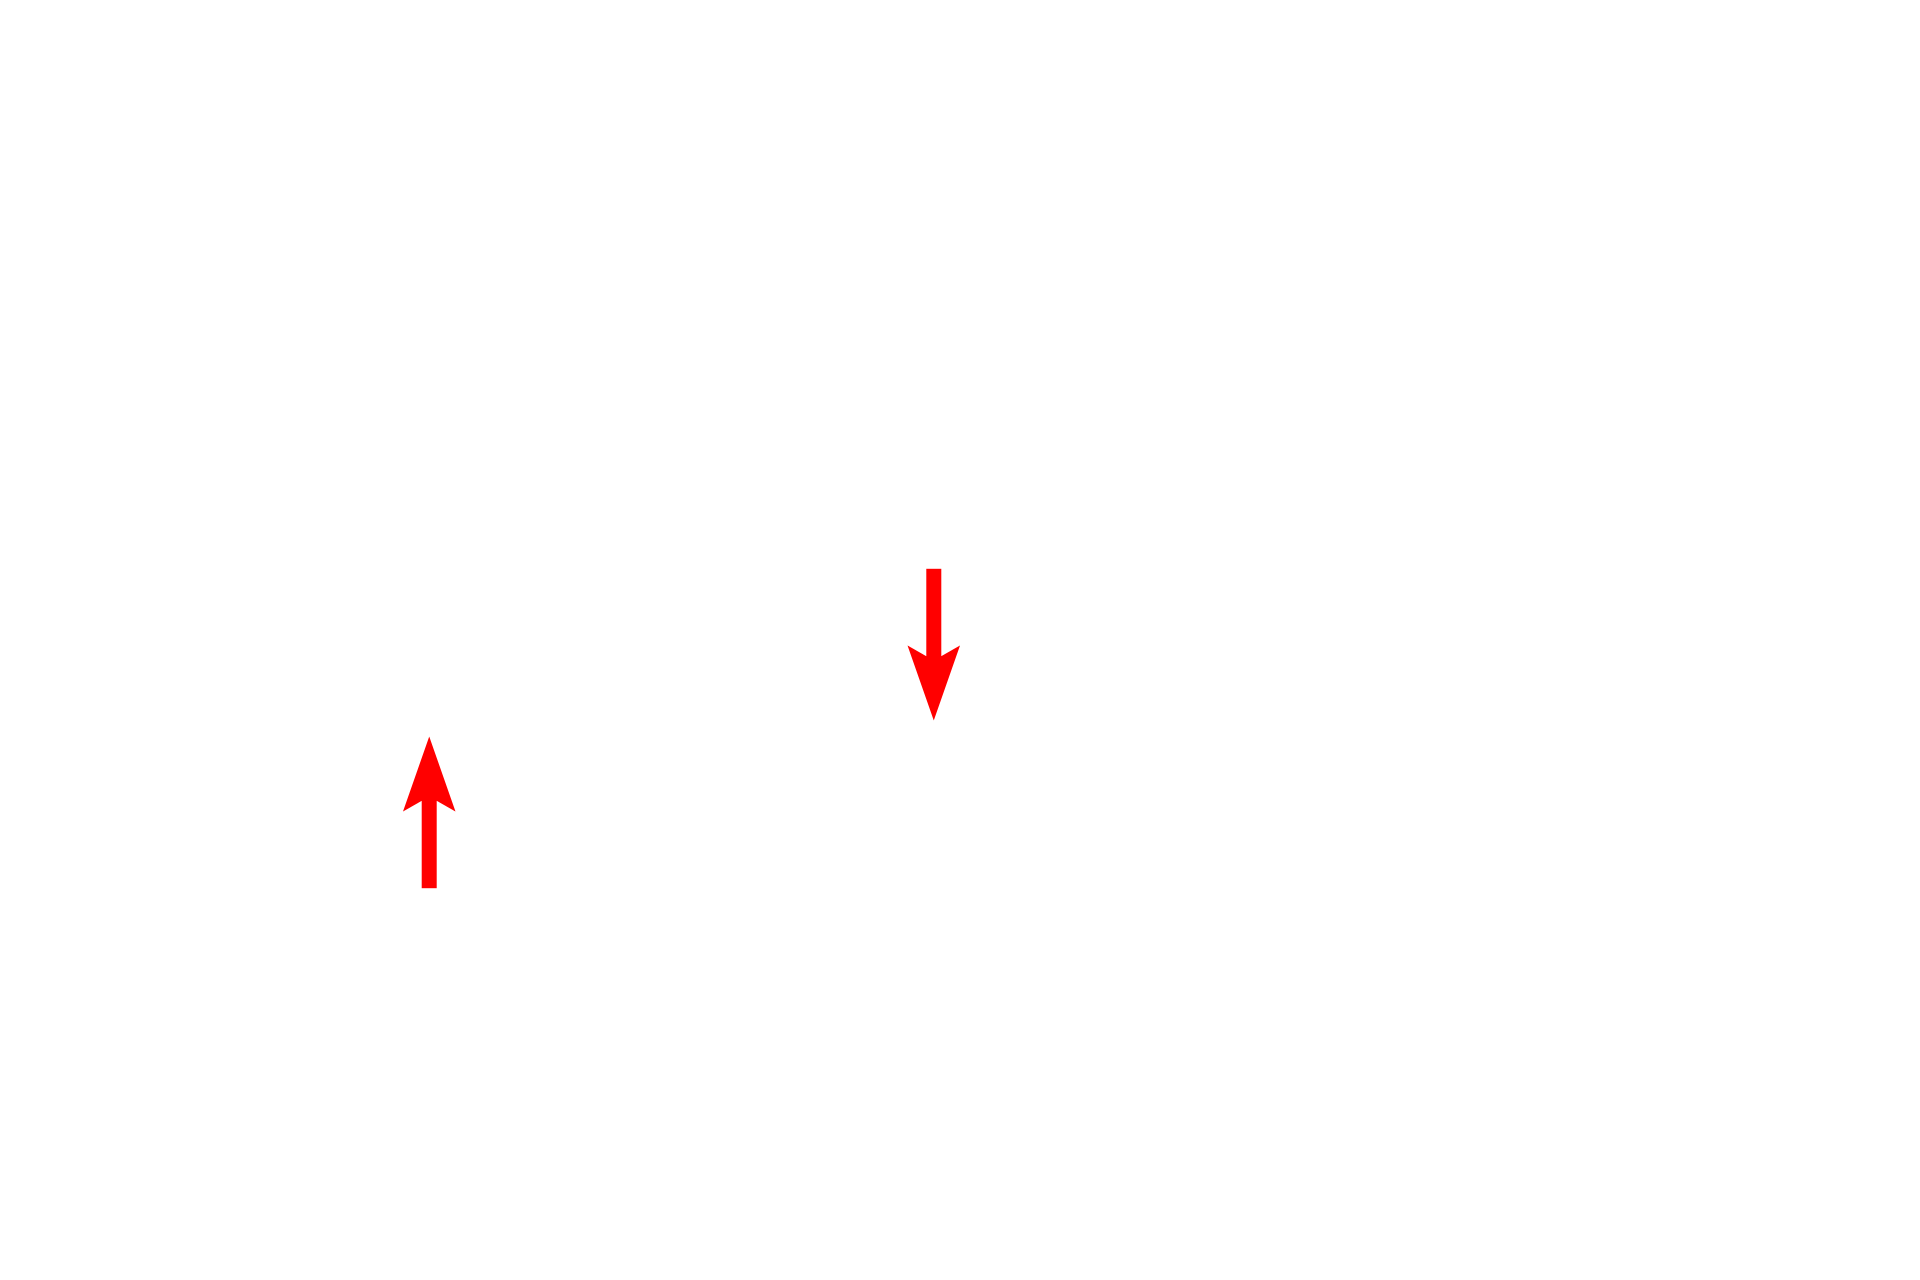  - Nuclear pores <p>Proteins for export and membrane insertion are synthesized by the RER and transferred to the Golgi via transport vesicles.  Transport vesicles fuse with the cis or forming face of the Golgi.  The proteins from the vesicles are post-translationally modified while moving toward the trans or maturing face. There, they are packaged into vesicles and secretory granules for transport to the plasma membrane.</p>
